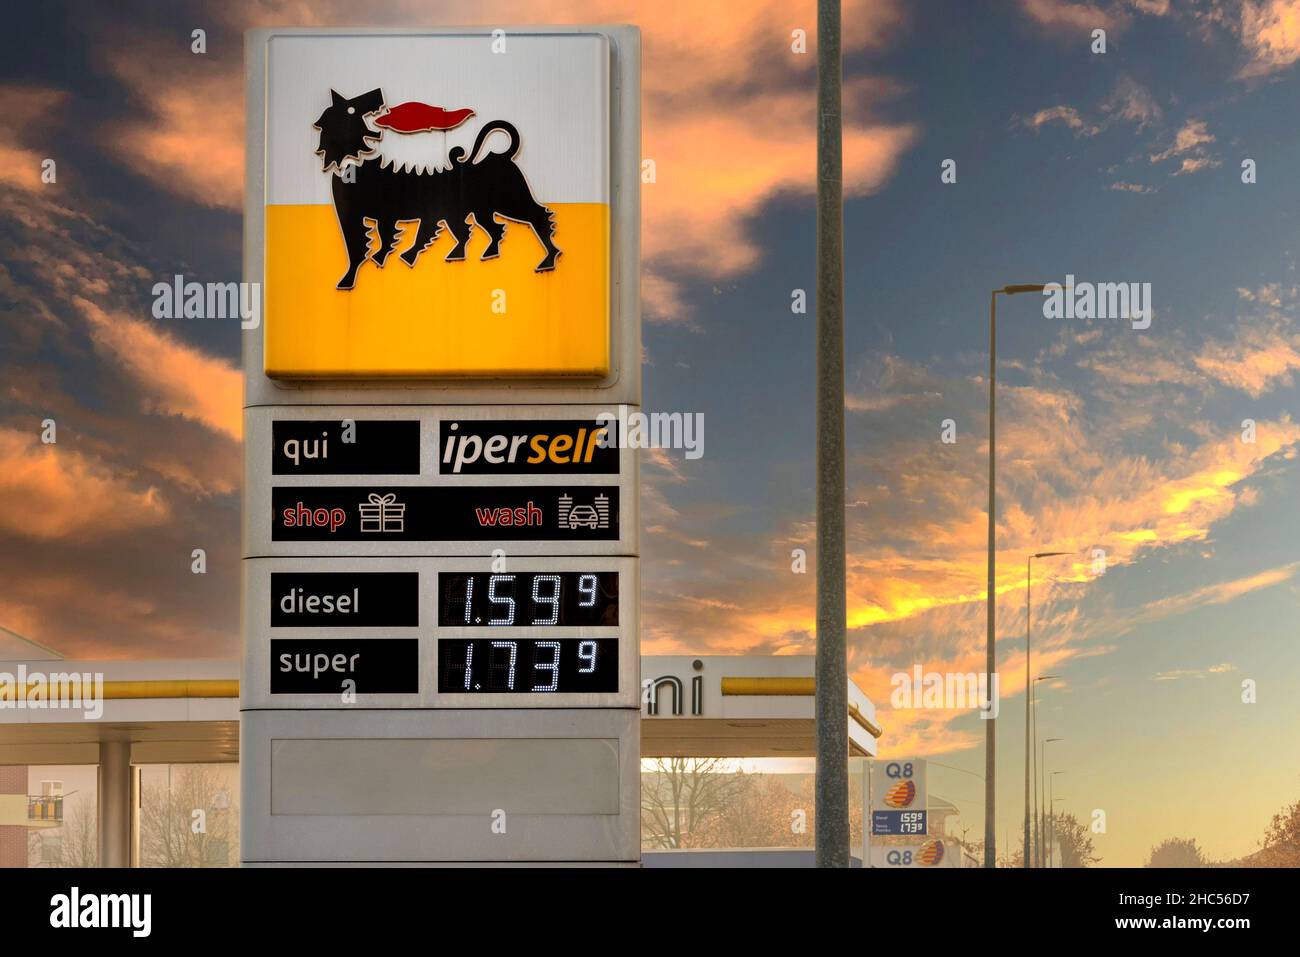 Fossano, Italy - December 23, 2021: Eni logo sign with fuel price display on sunset sky, Eni S.p.a is an Italian oil company worldwide. Expensive fuel Stock Photo